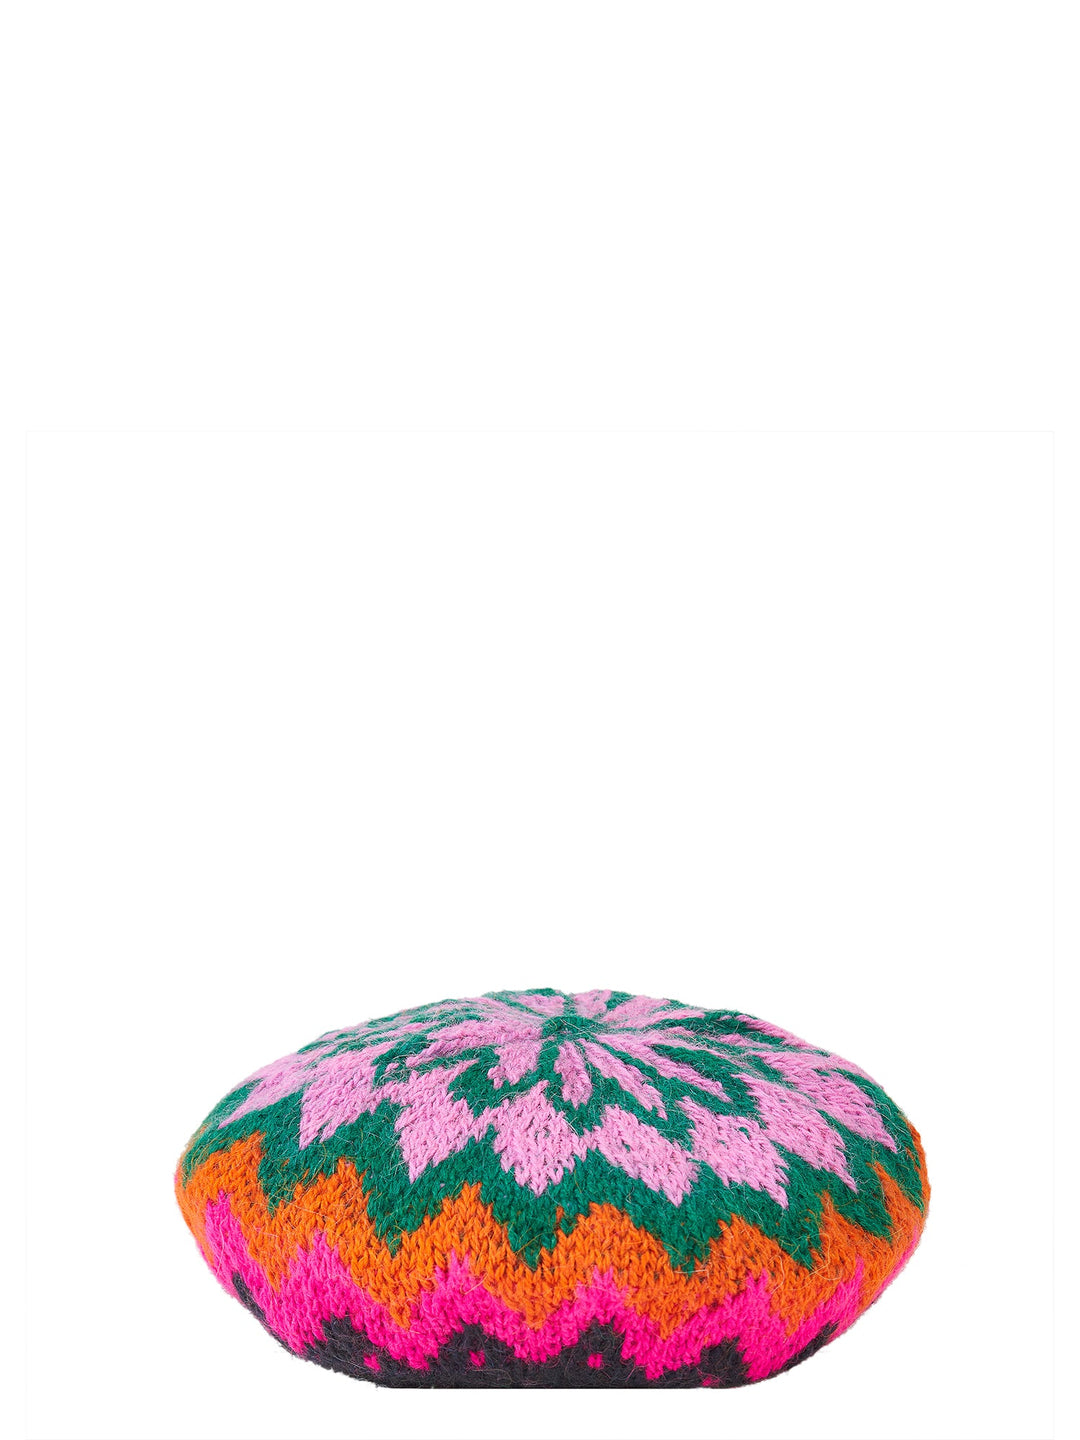 Carnvalito Hand Knitted Beret